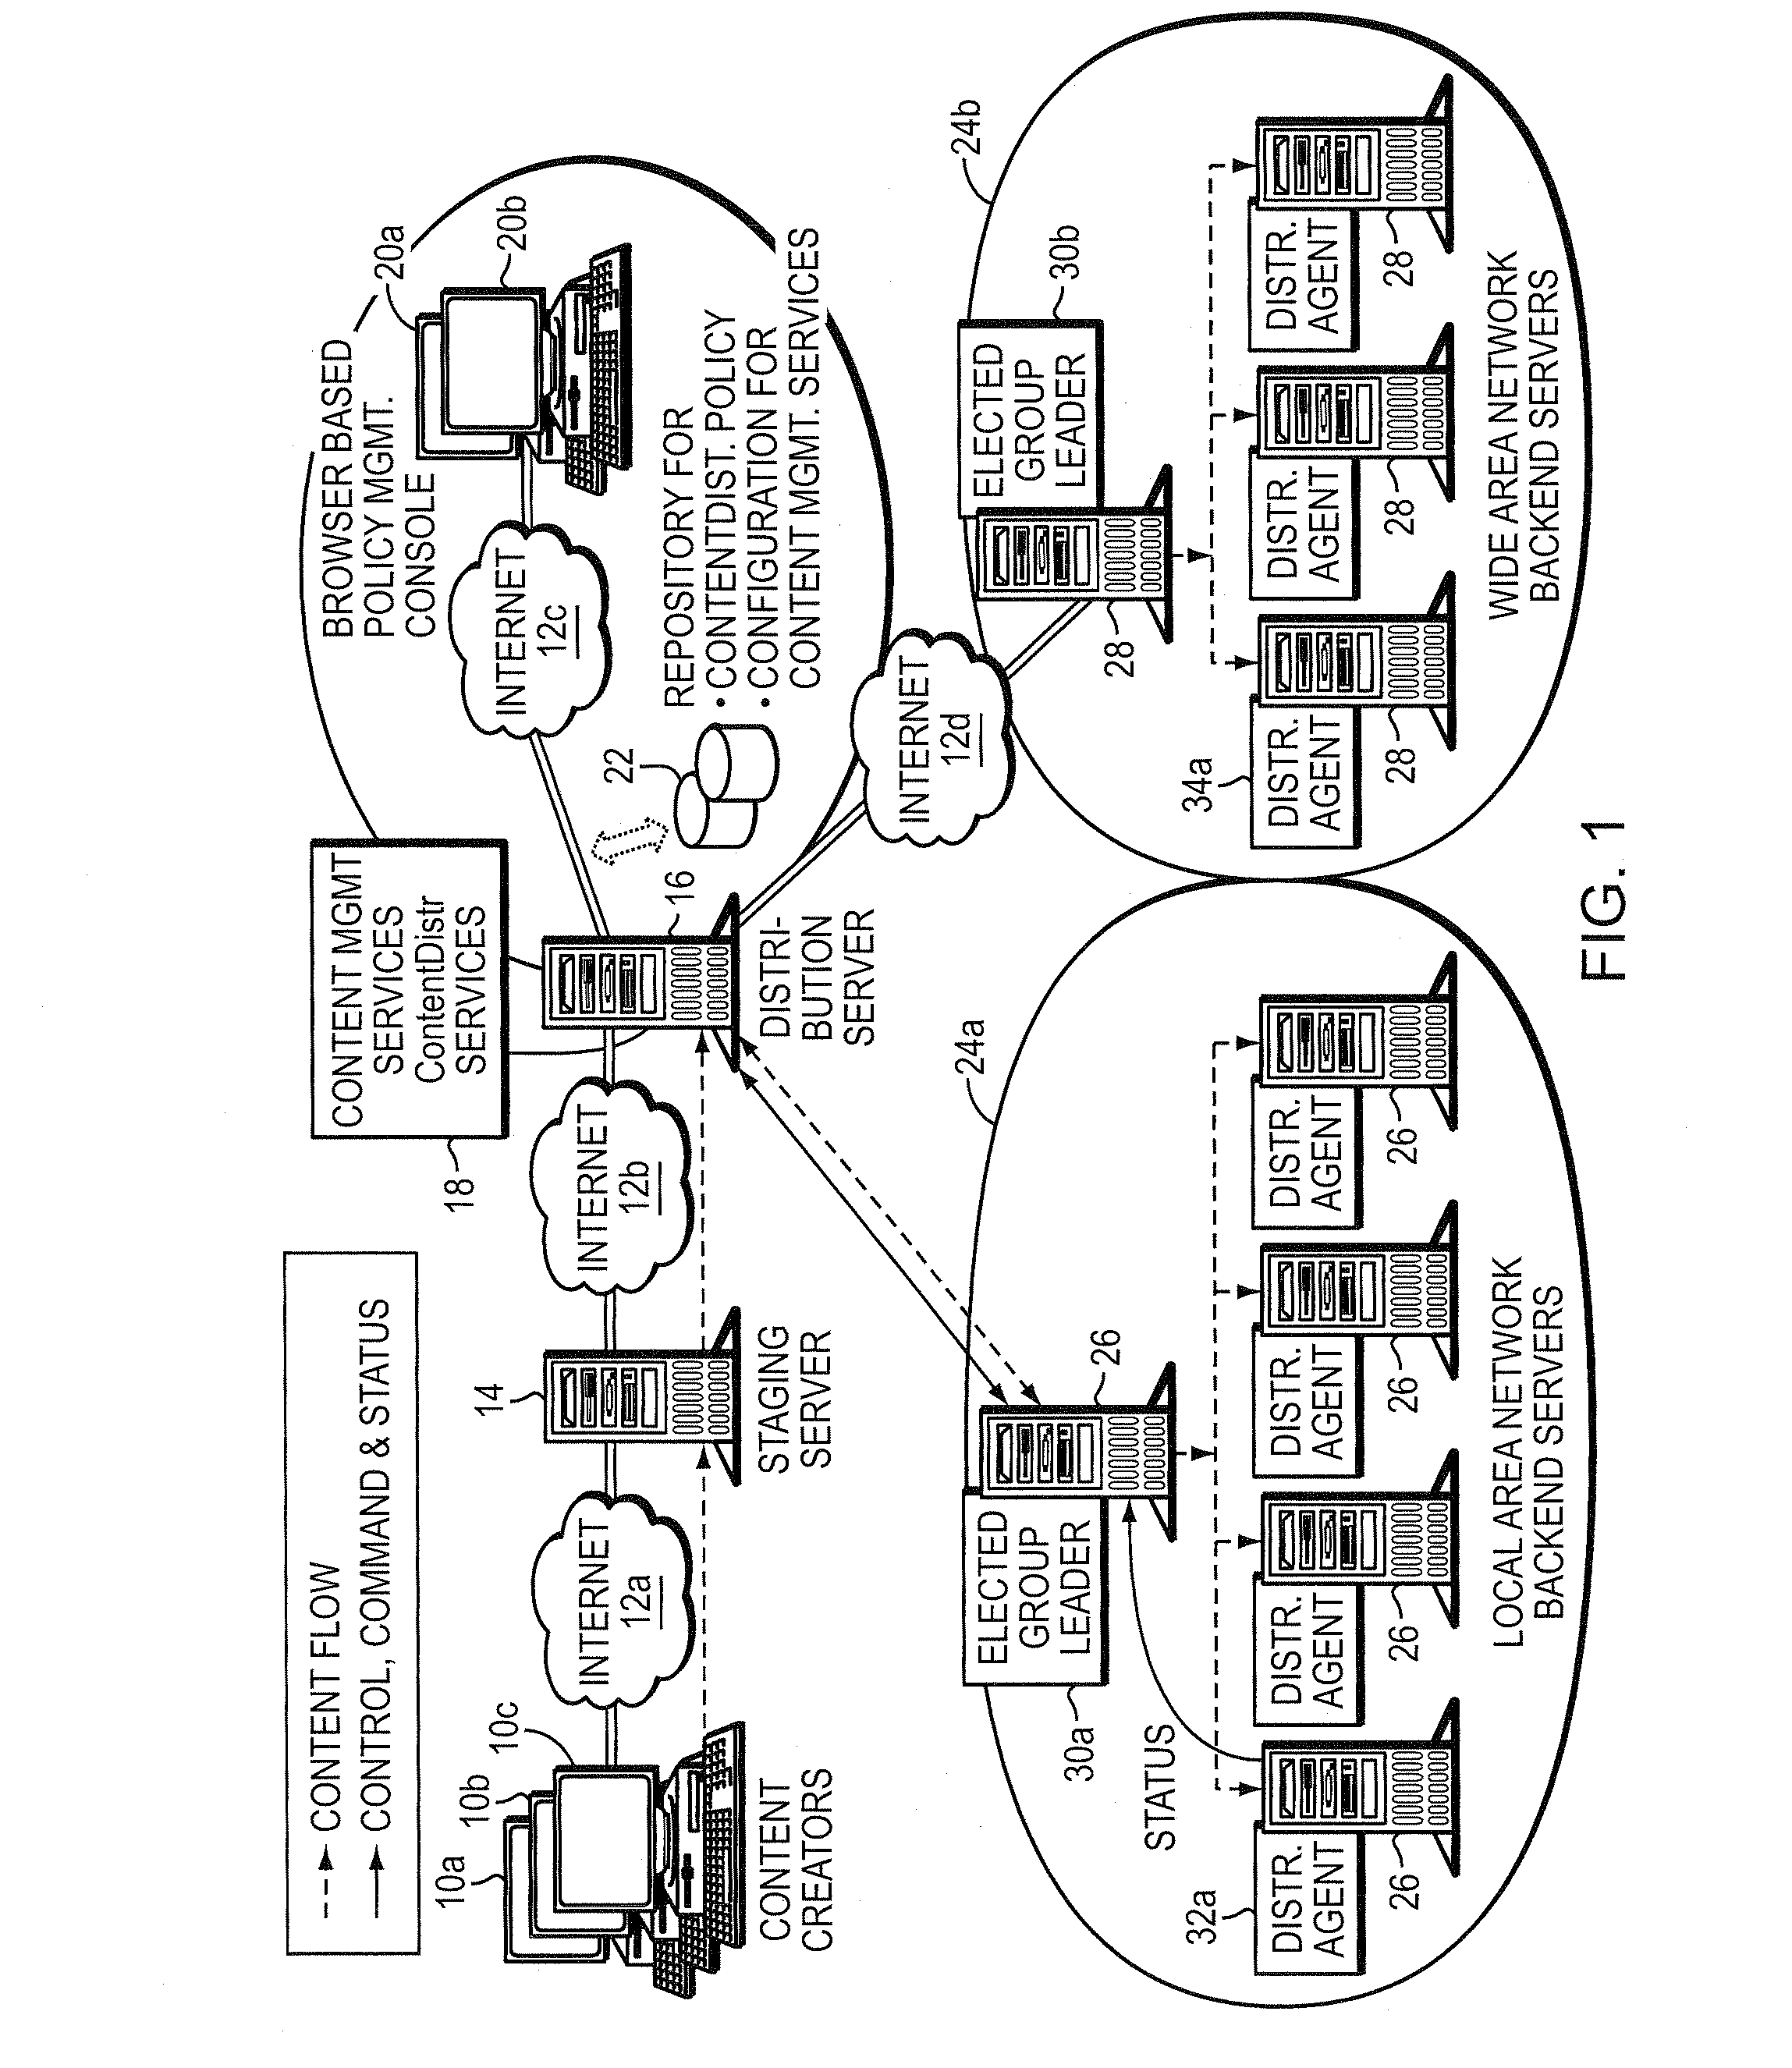 Method and apparatus for dynamic resource discovery and information distribution in a data network